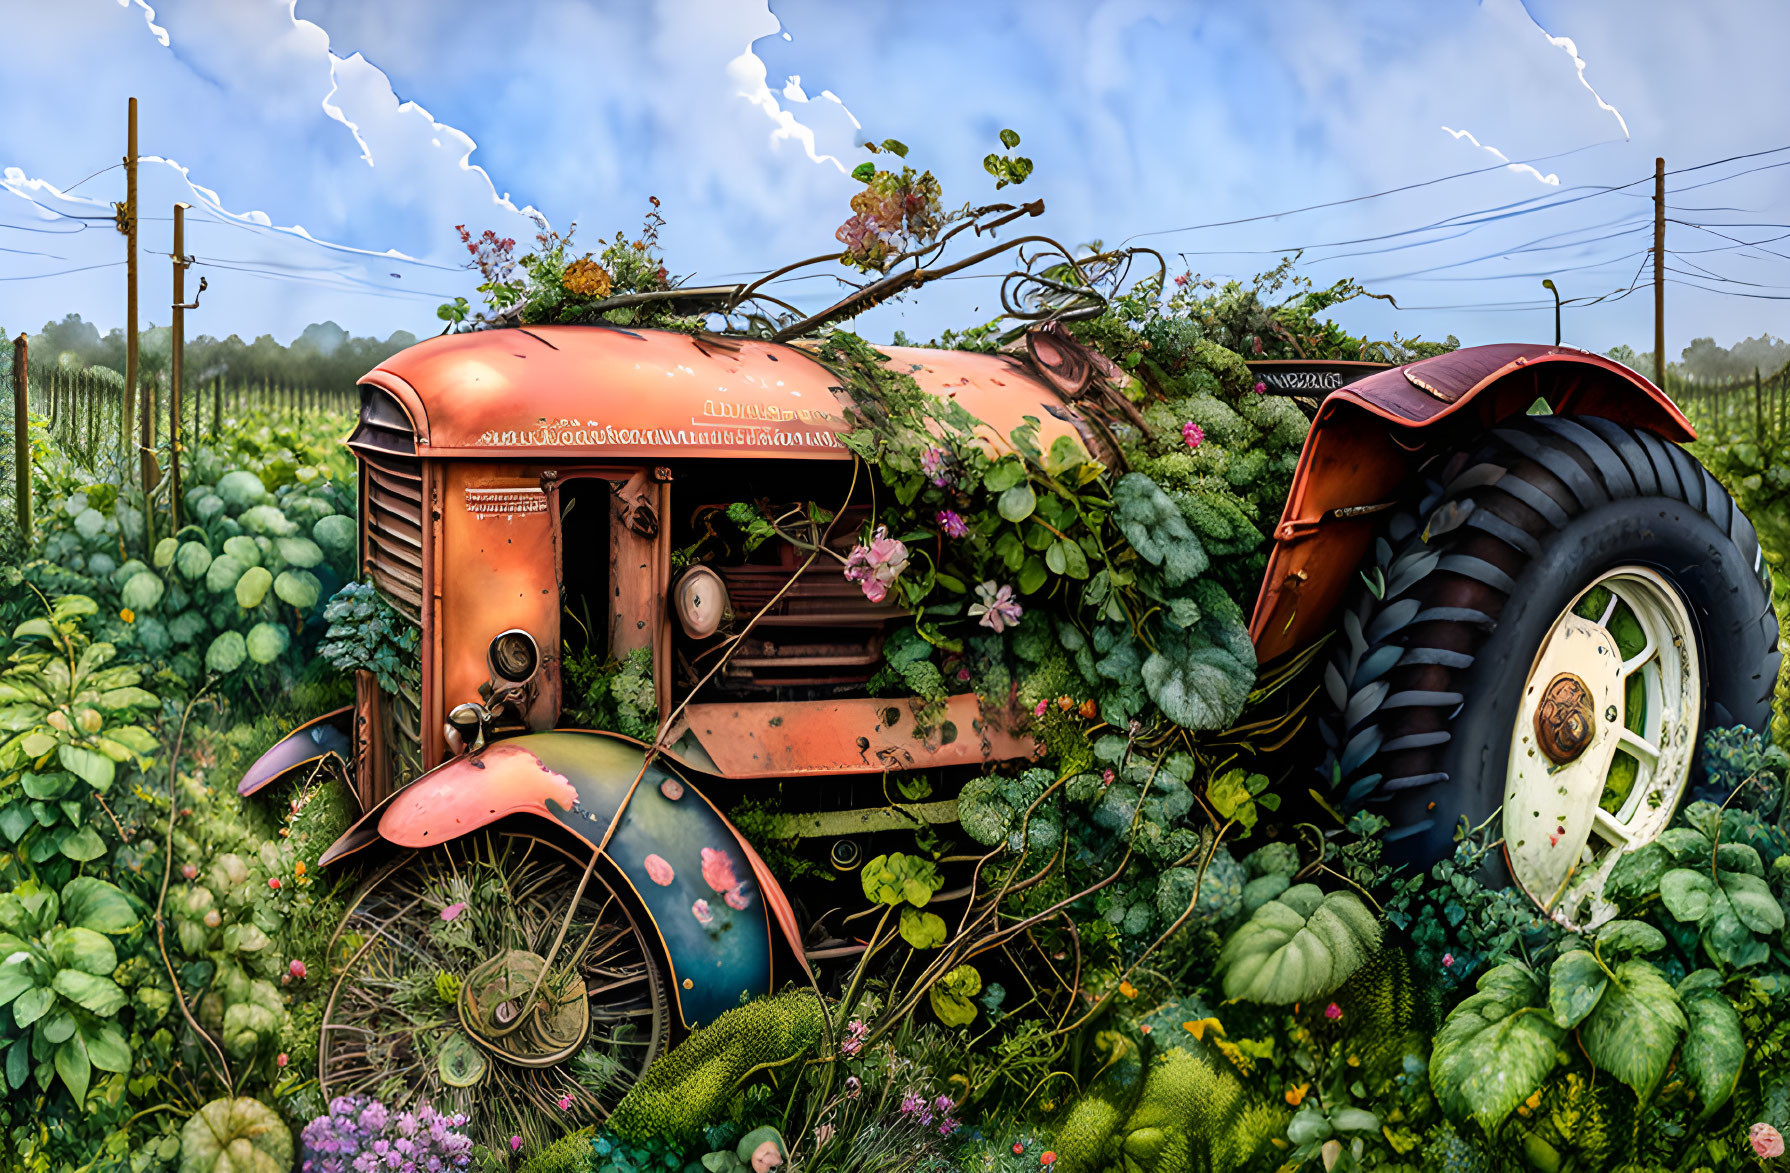 Rusty tractor covered in vines in lush field with power lines.